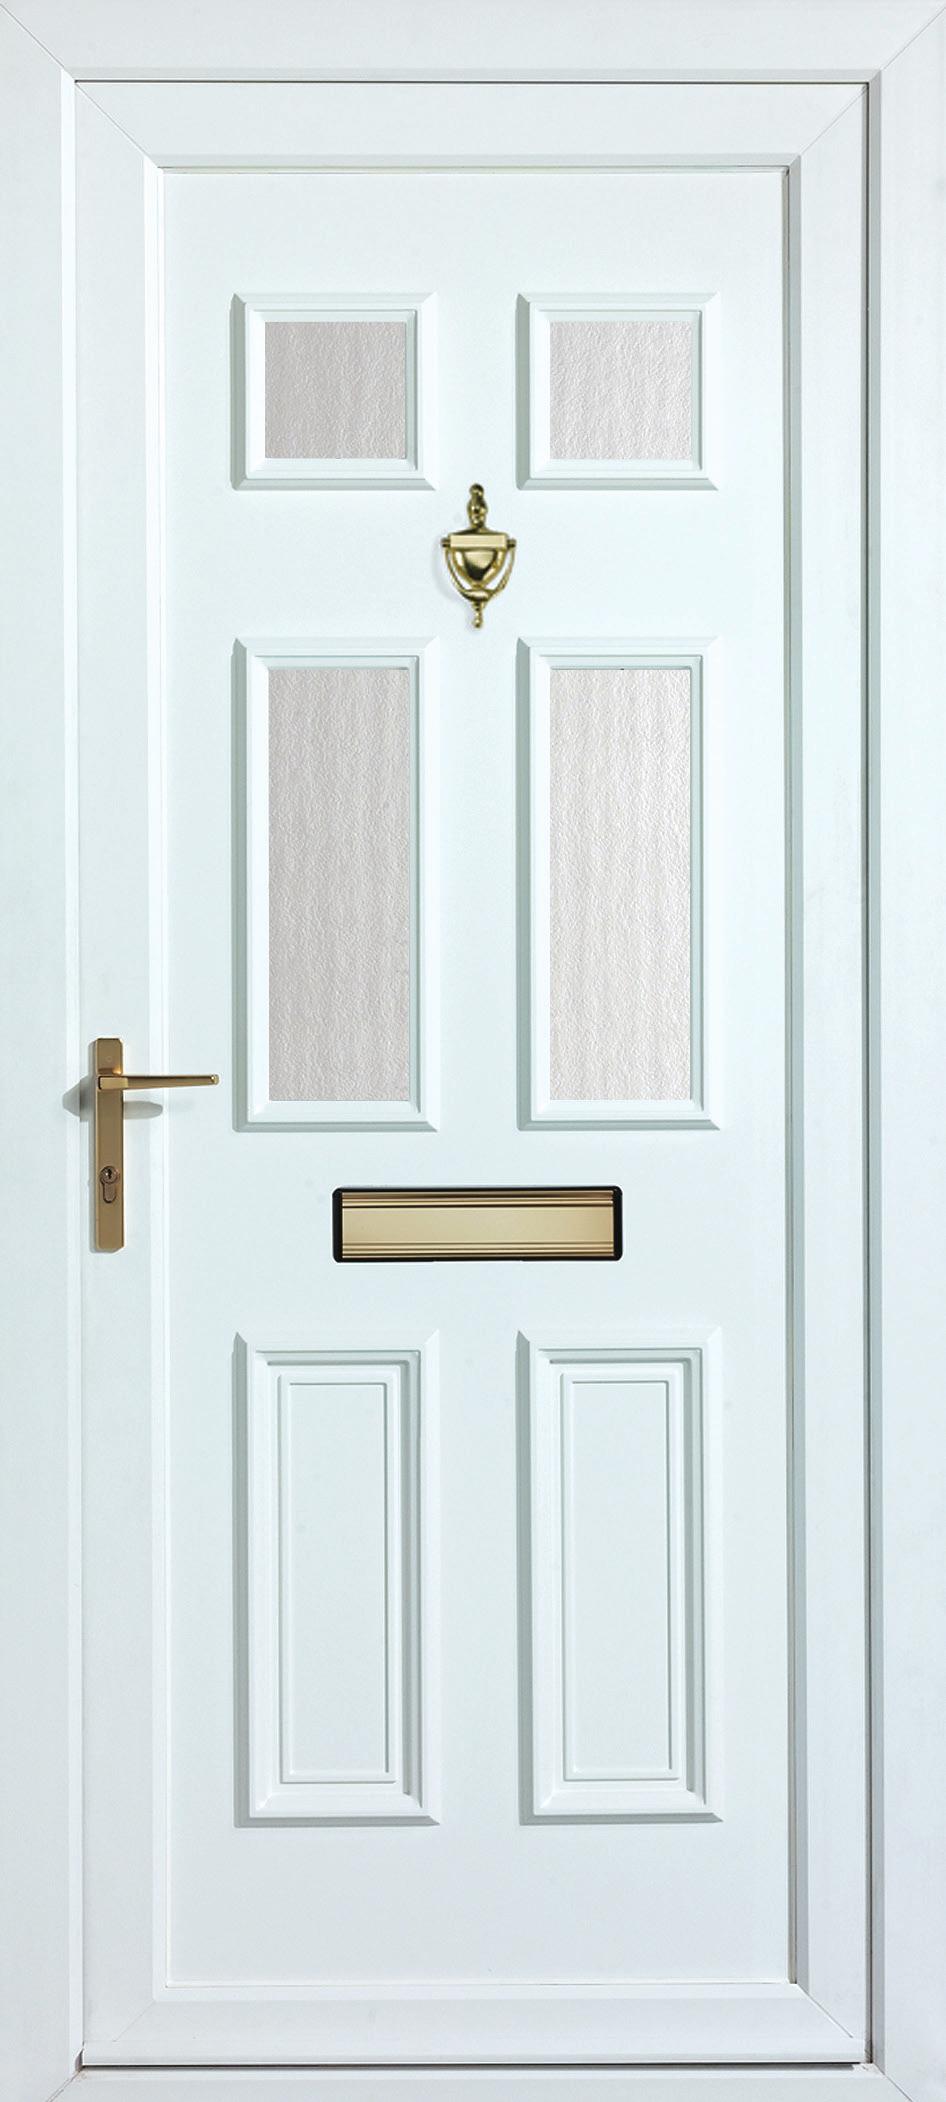 OXFORD The Oxford door is a versatile style, available as a solid or inverted door, or with 2